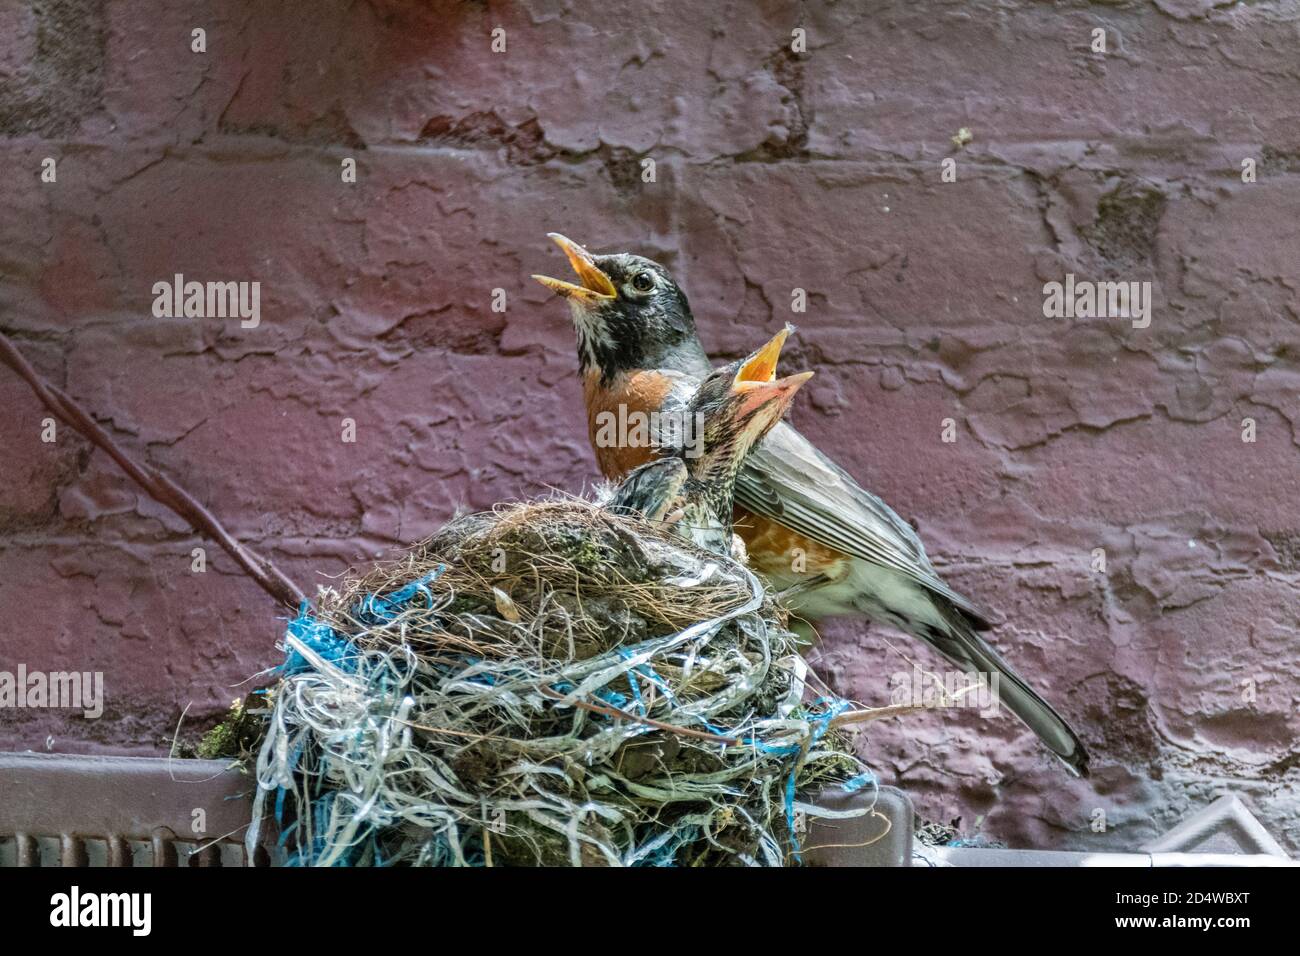 Adult American Robin, Turdus migratorius, with chick in nest, appearing to sing a duet with beaks open, New York City, USA Stock Photo